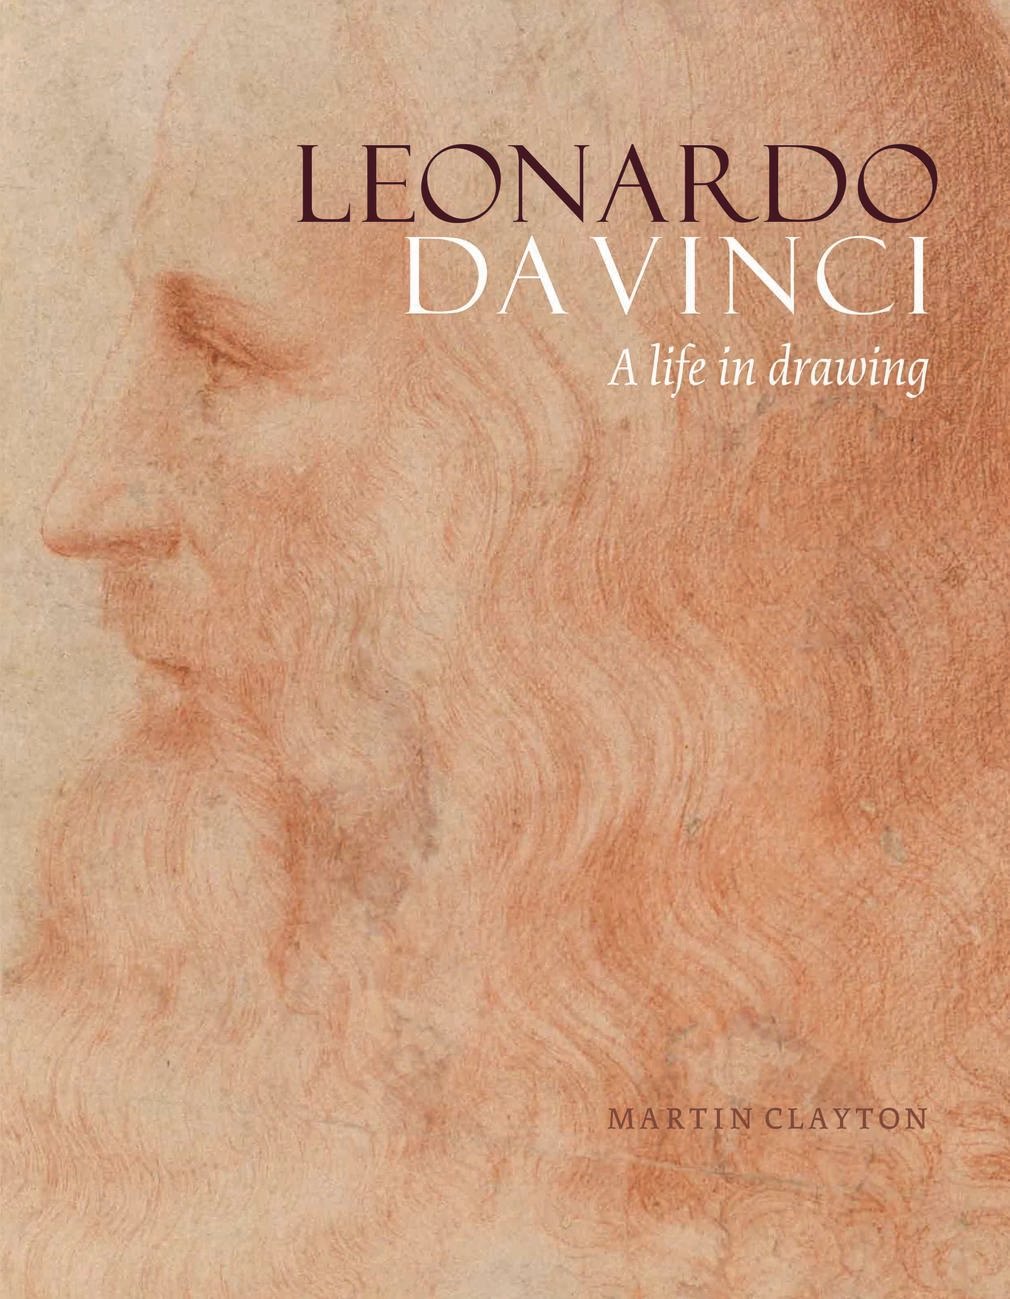 Leonardo: A Life in Drawing book cover